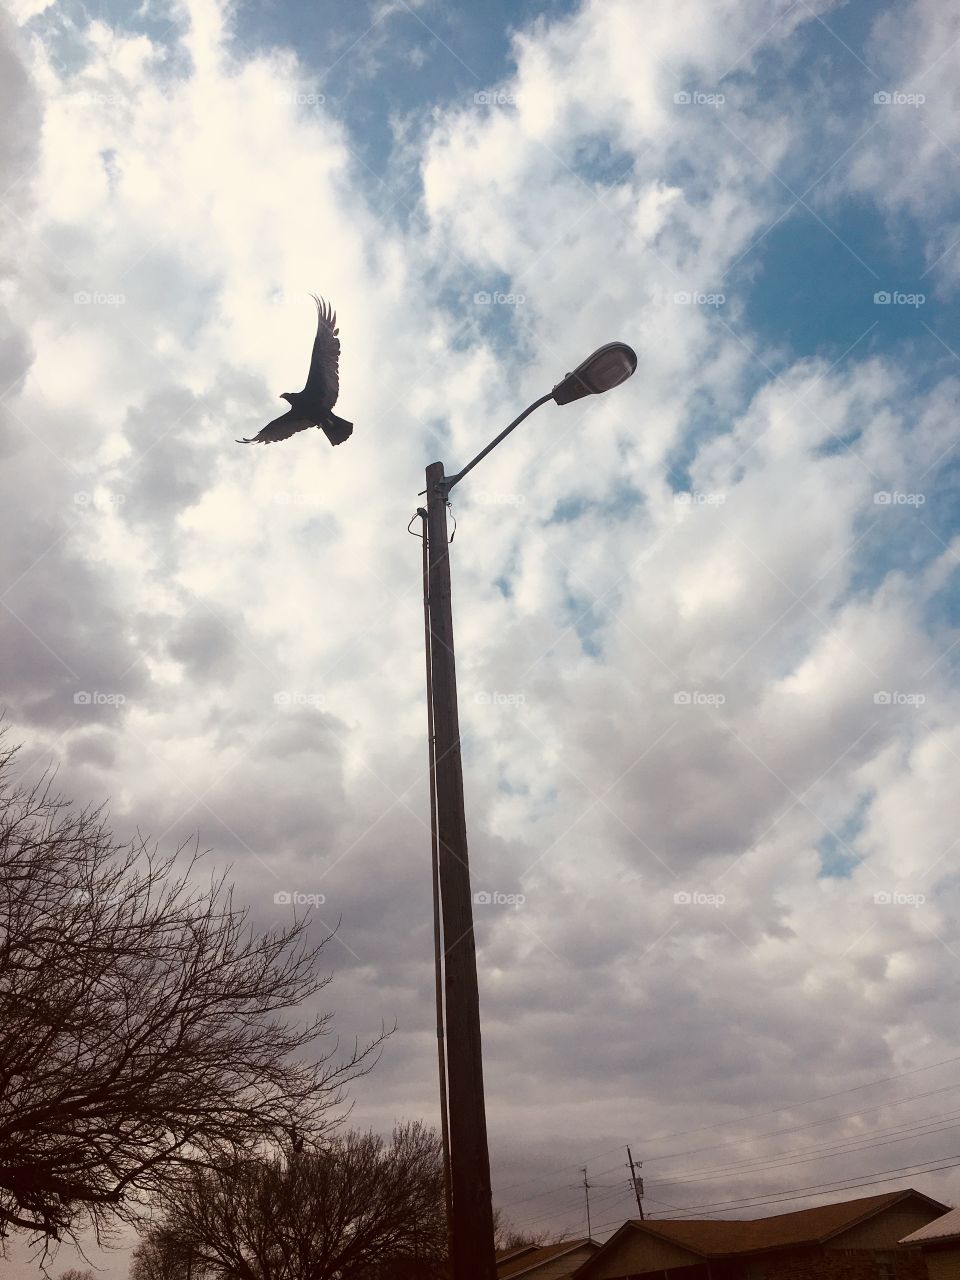 A Bird I photo captured in action hopping right off the light post. Taken in Killeen Texas. 